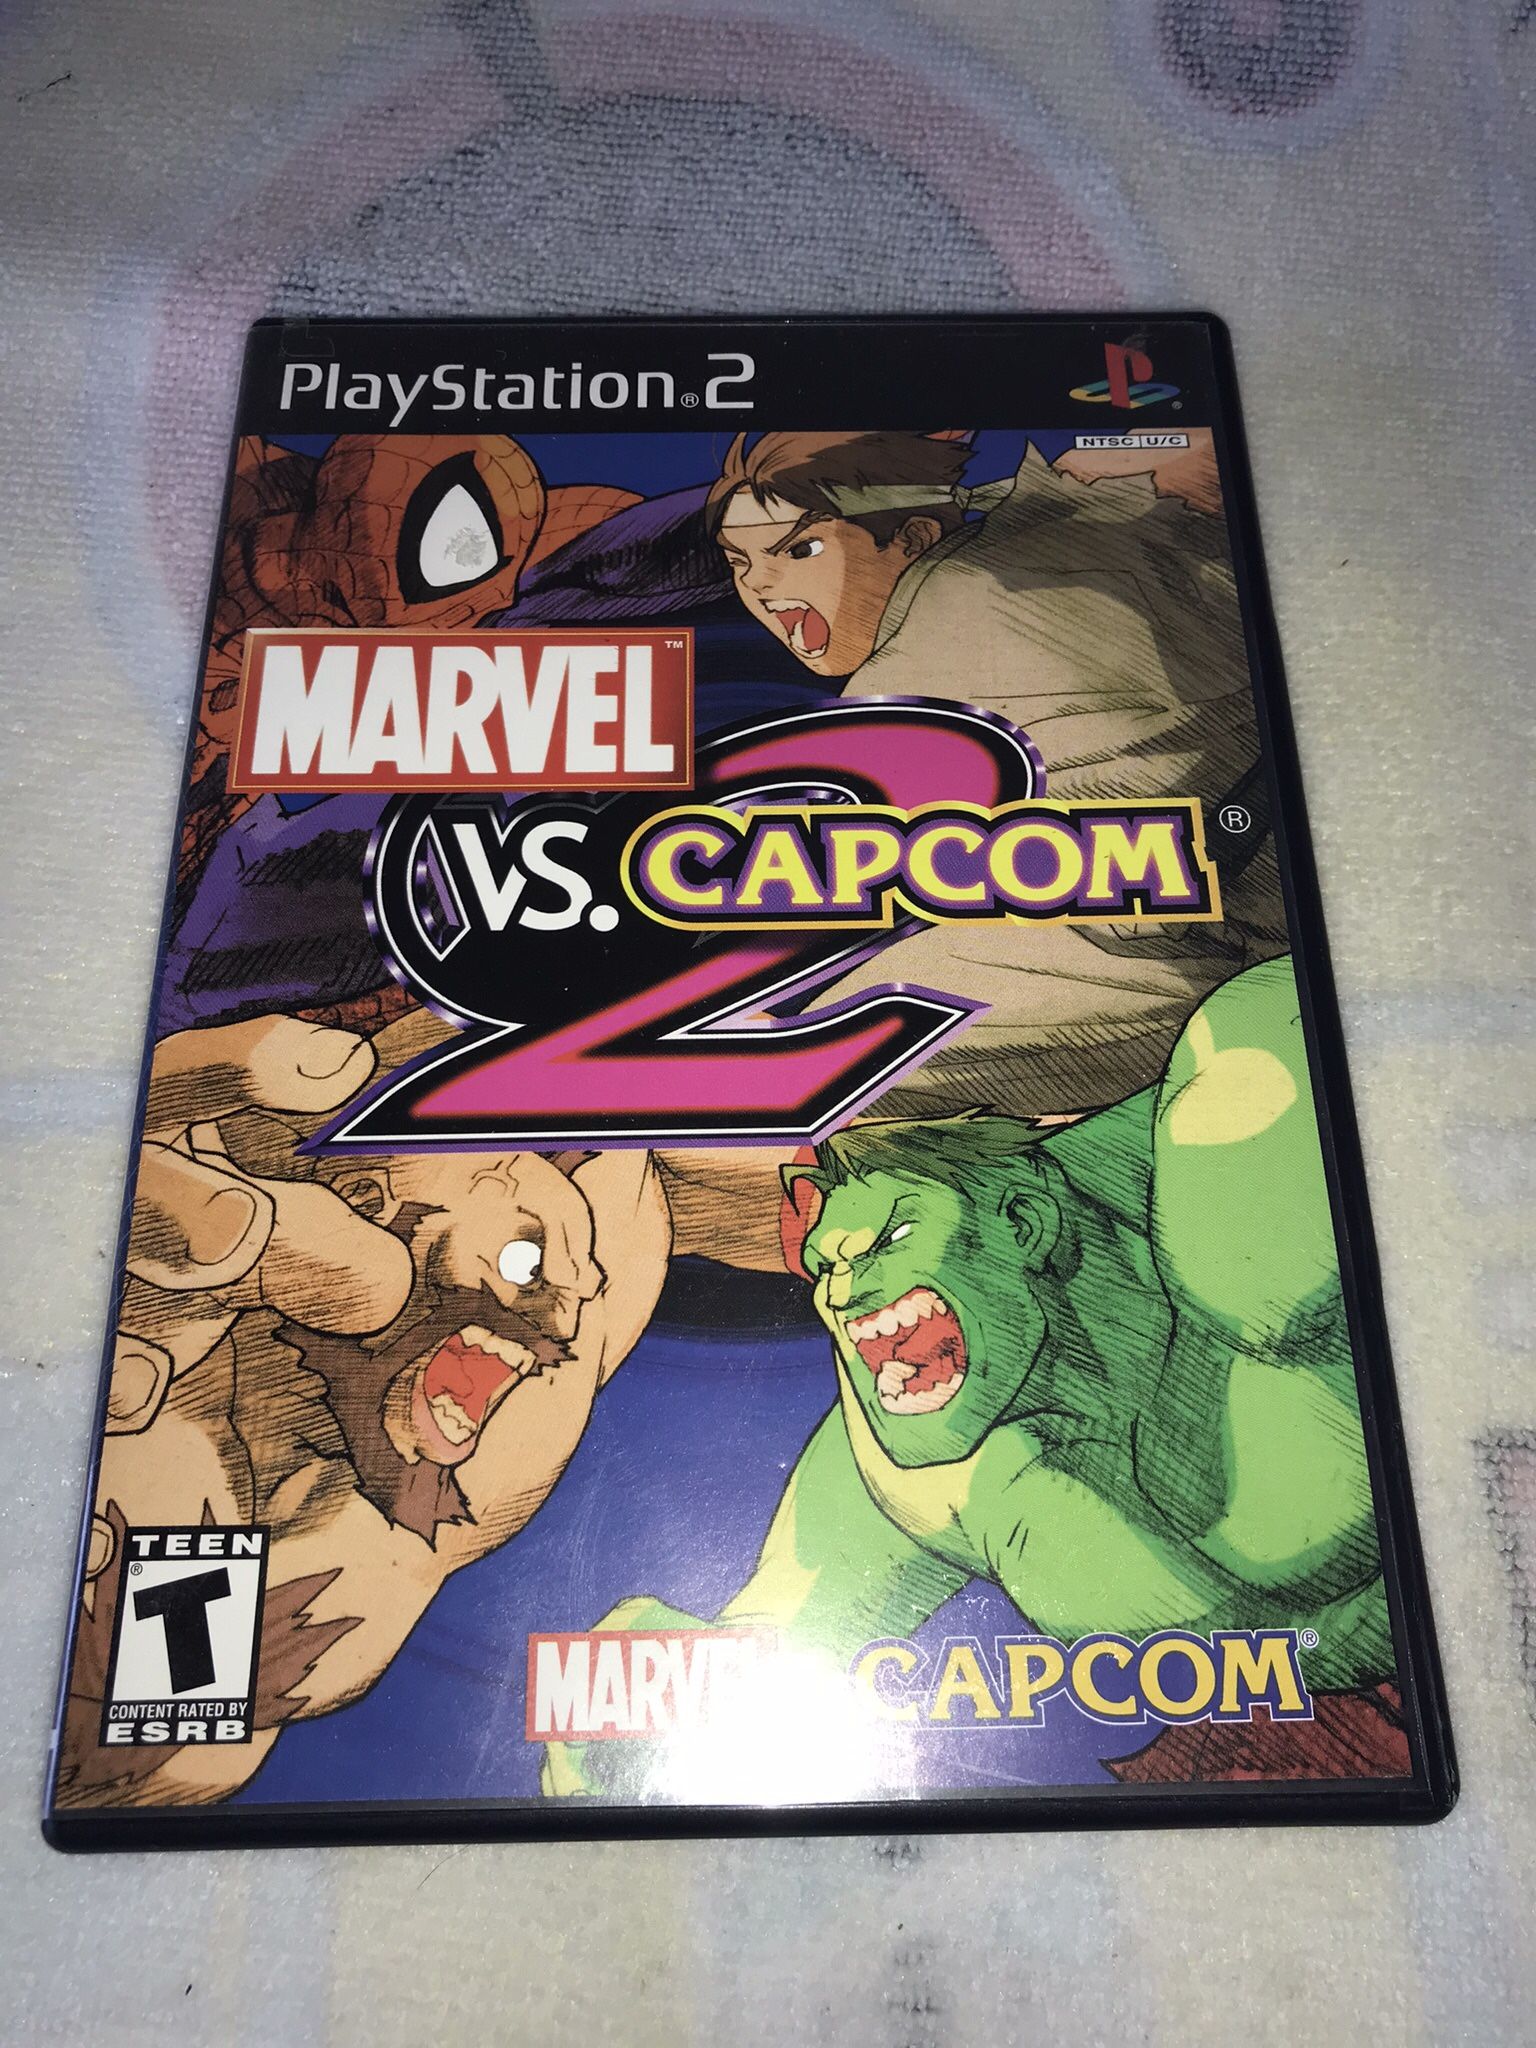 Marvel VS. Capcom 2 PS2 (Sony PlayStation 2, 2002) w/ Manual! Tested & Working!